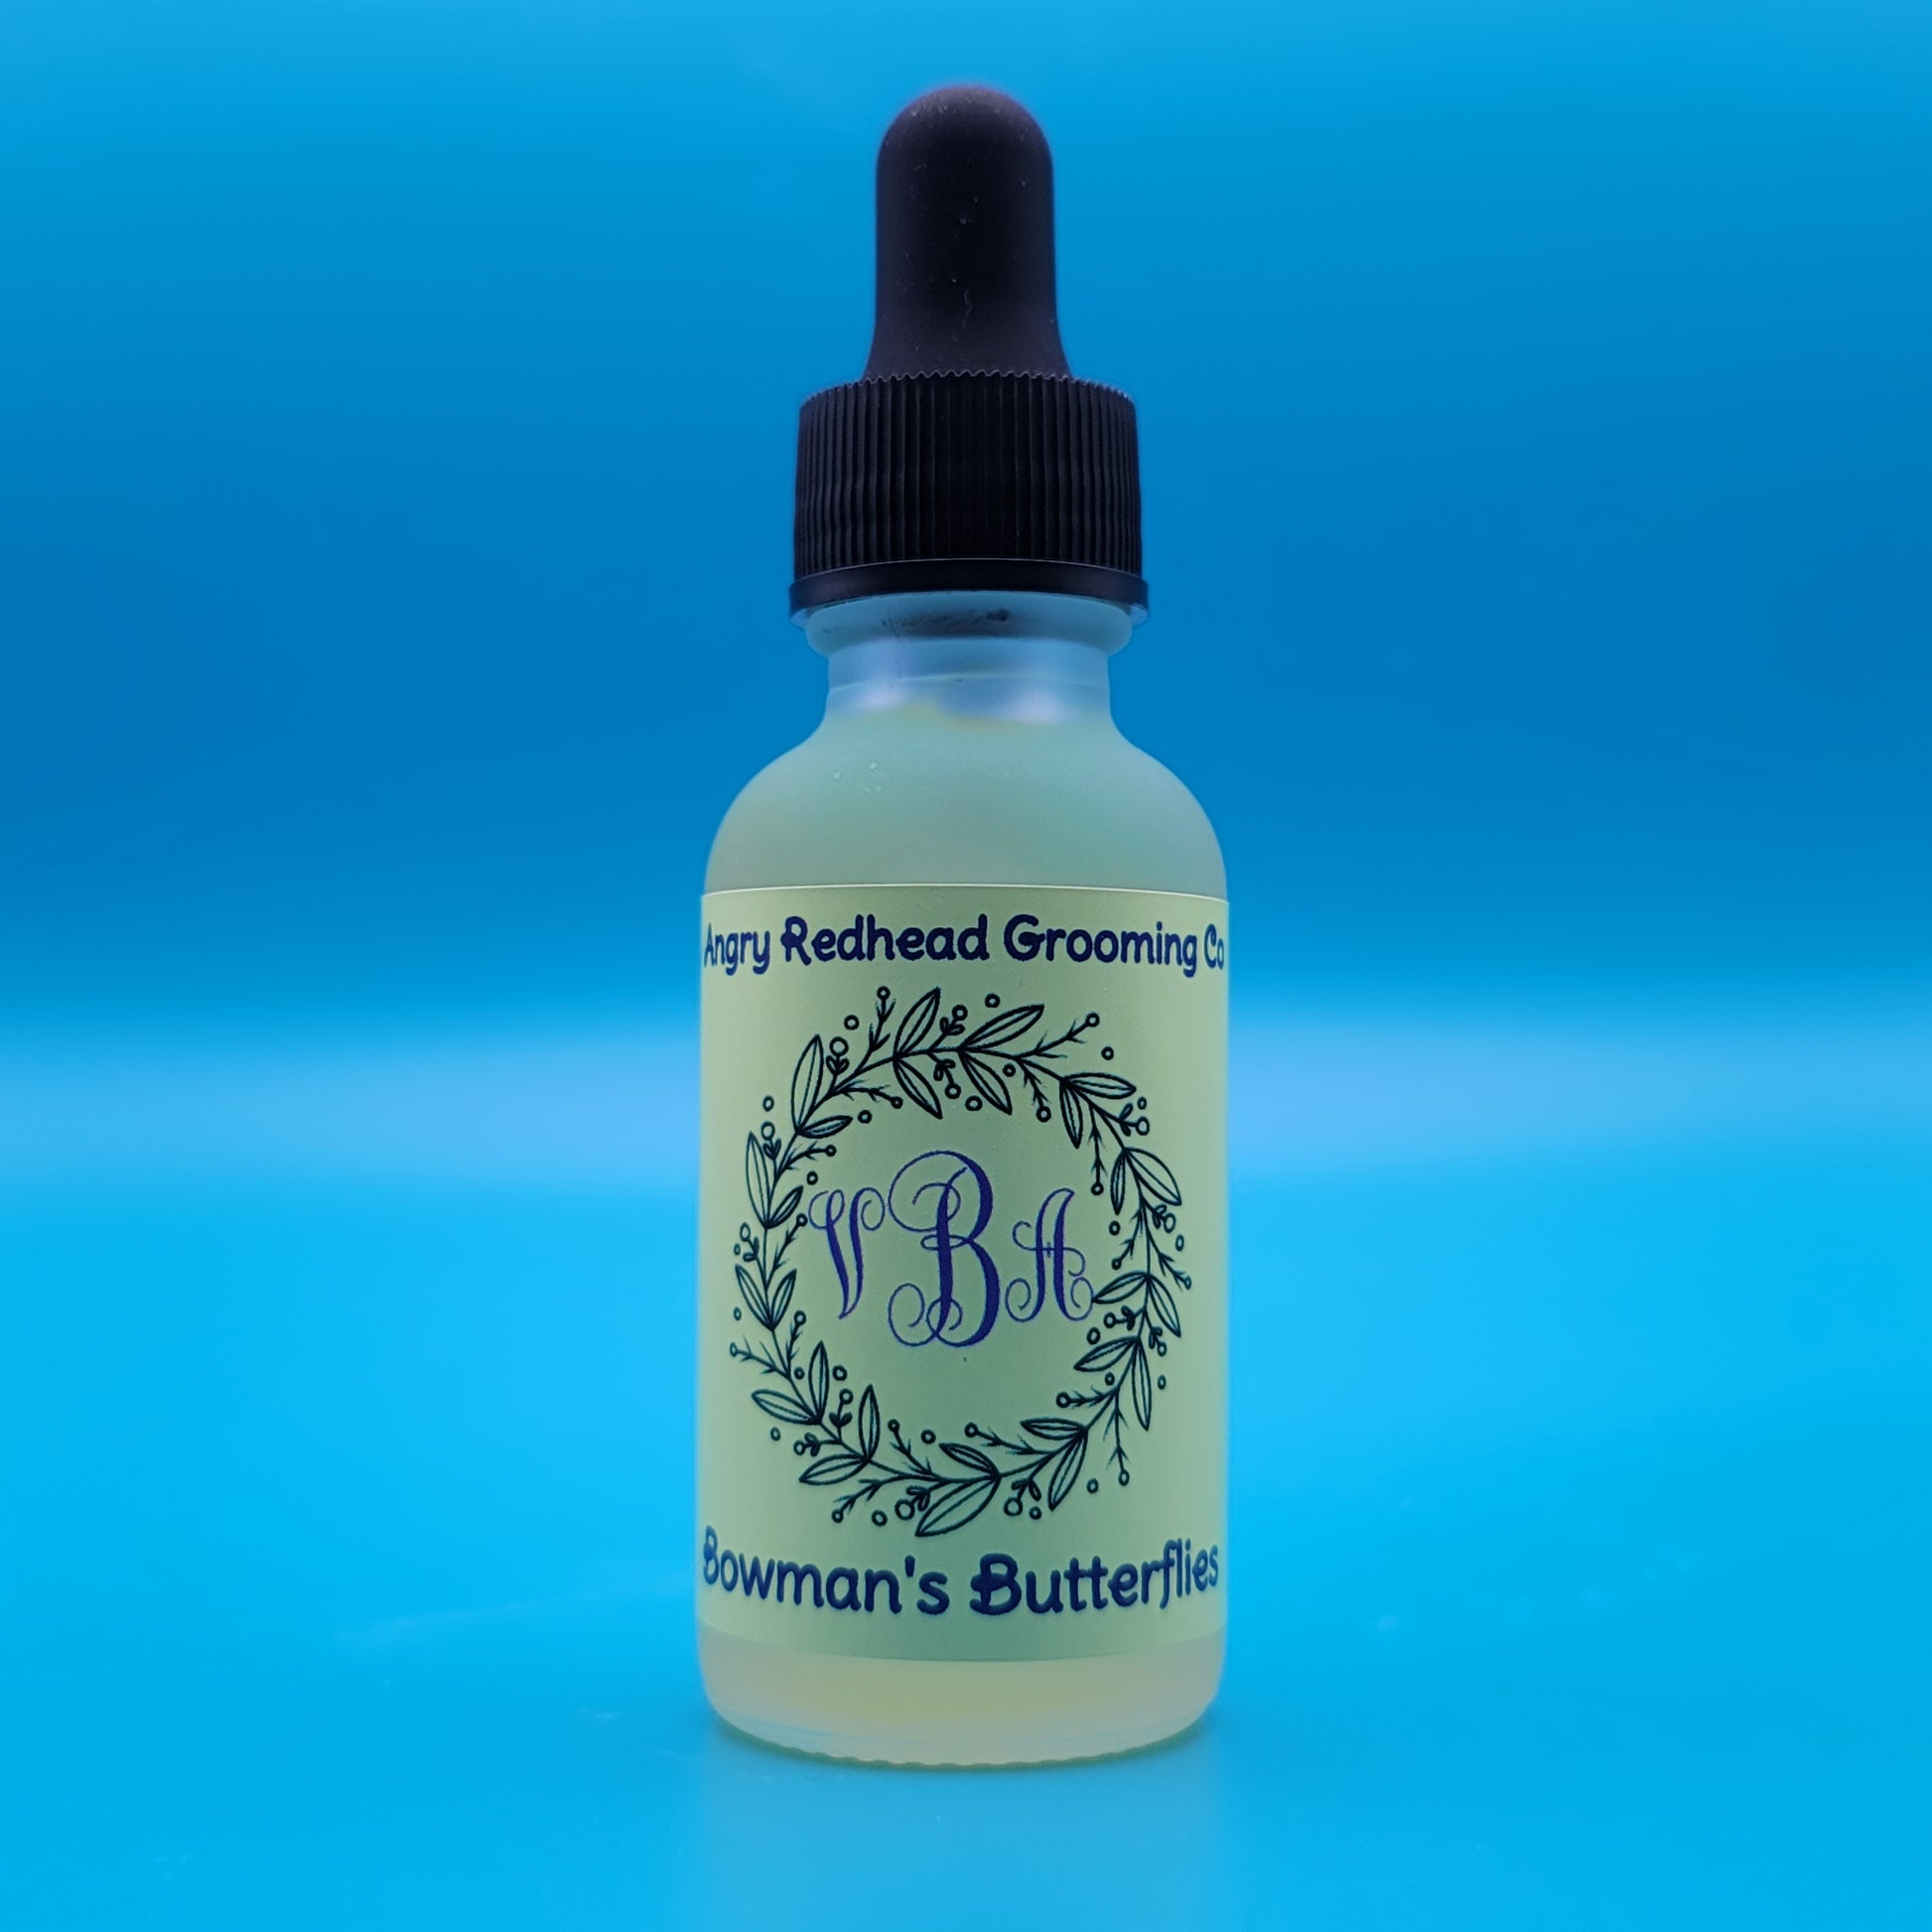 Bowman's Butterflies Pre-Shave Oil by Angry Redhead Grooming Co - angryredheadgrooming.com